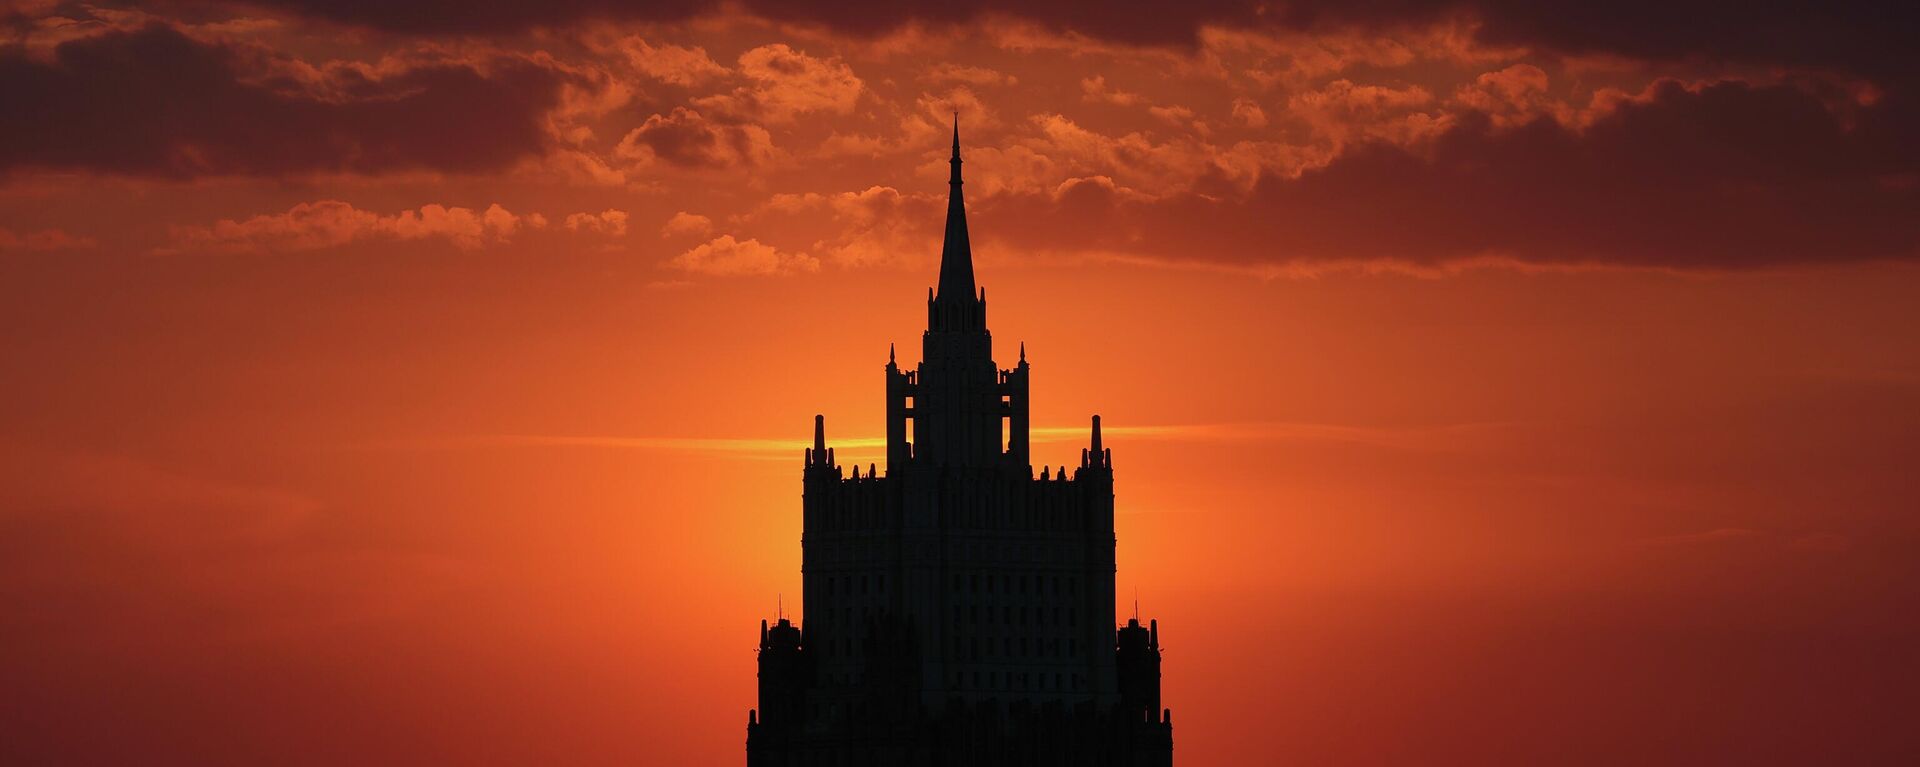 The building of the Ministry of Foreign Affairs of the Russian Federation in Moscow at sunset. - Sputnik International, 1920, 10.10.2022